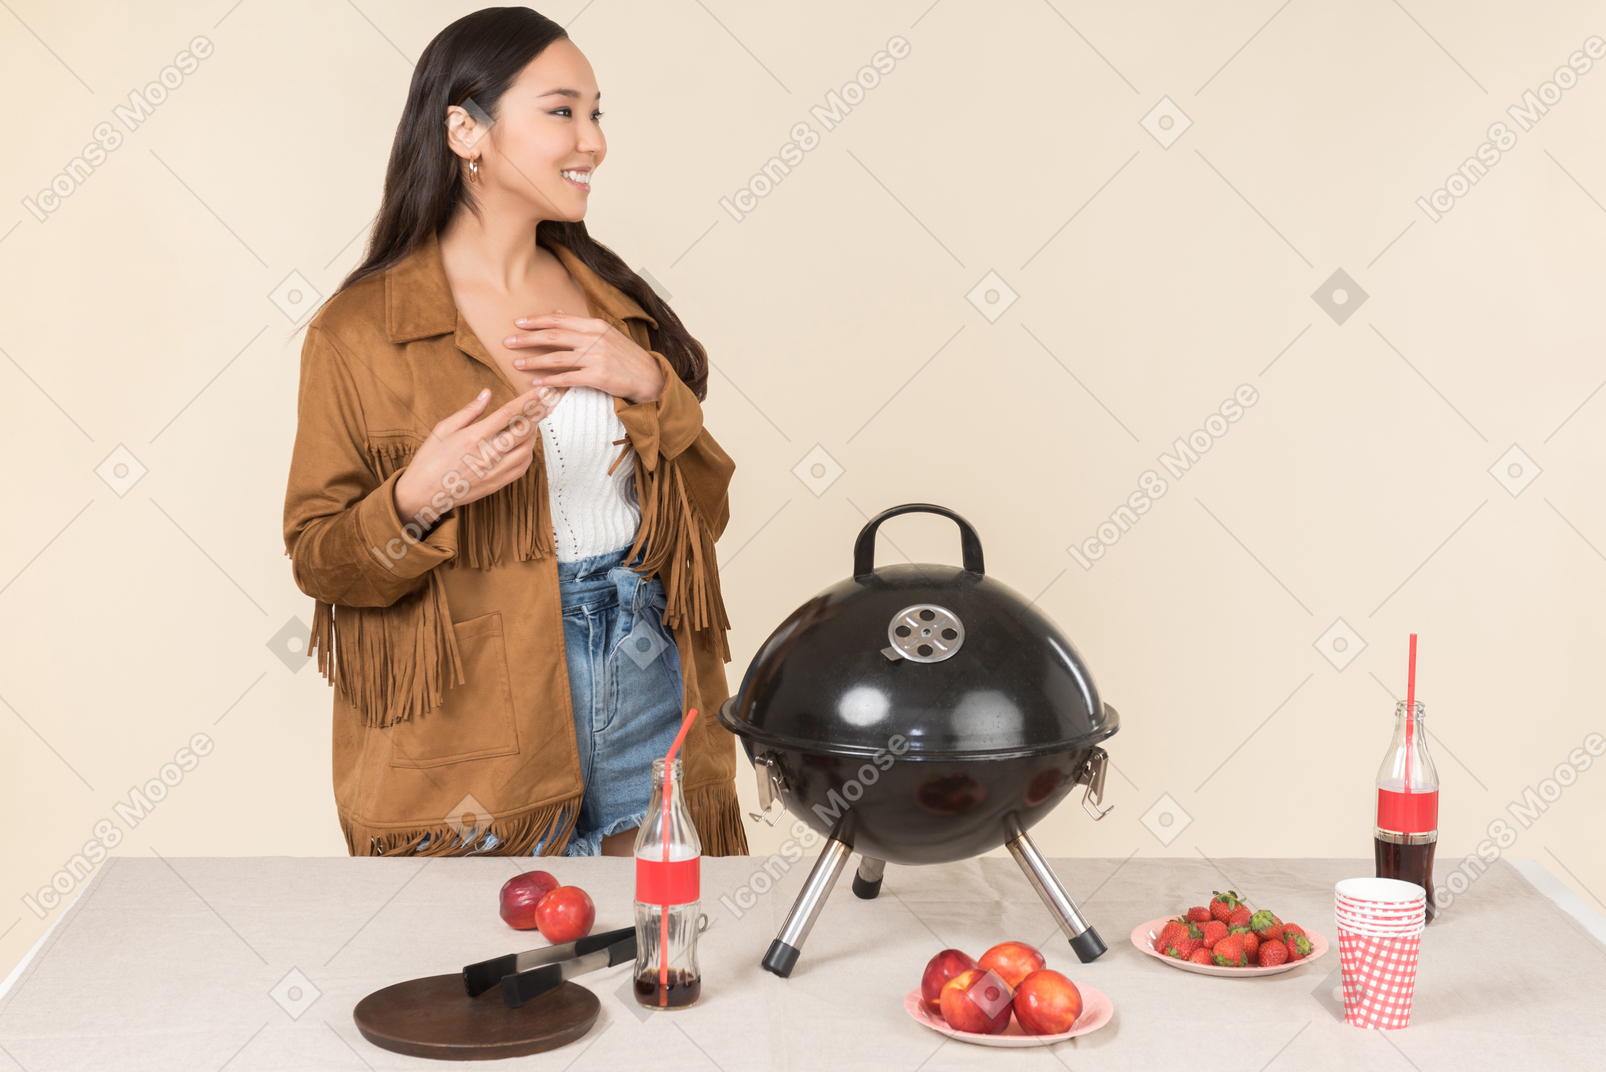 Smiling young asian girl standing near grill on the table